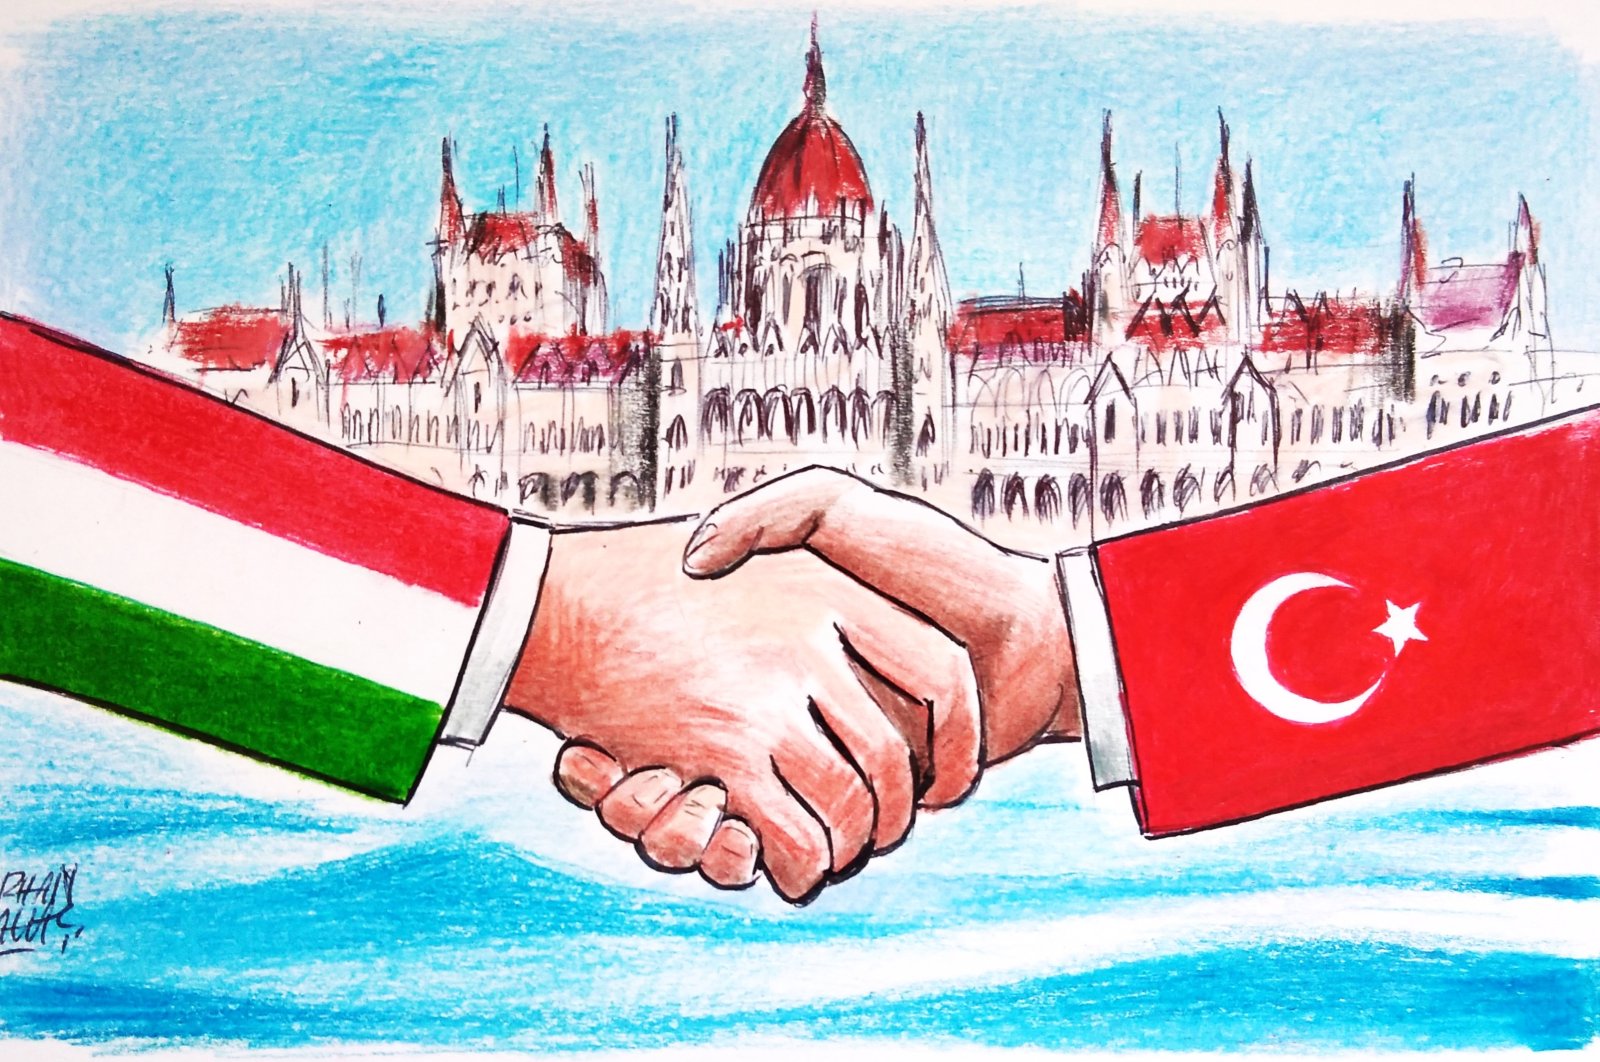 &quot;It is possible to identify defense, energy and trade as areas of strategic cooperation between Ankara and Budapest.&quot; (Illustration by Erhan Yalvaç)